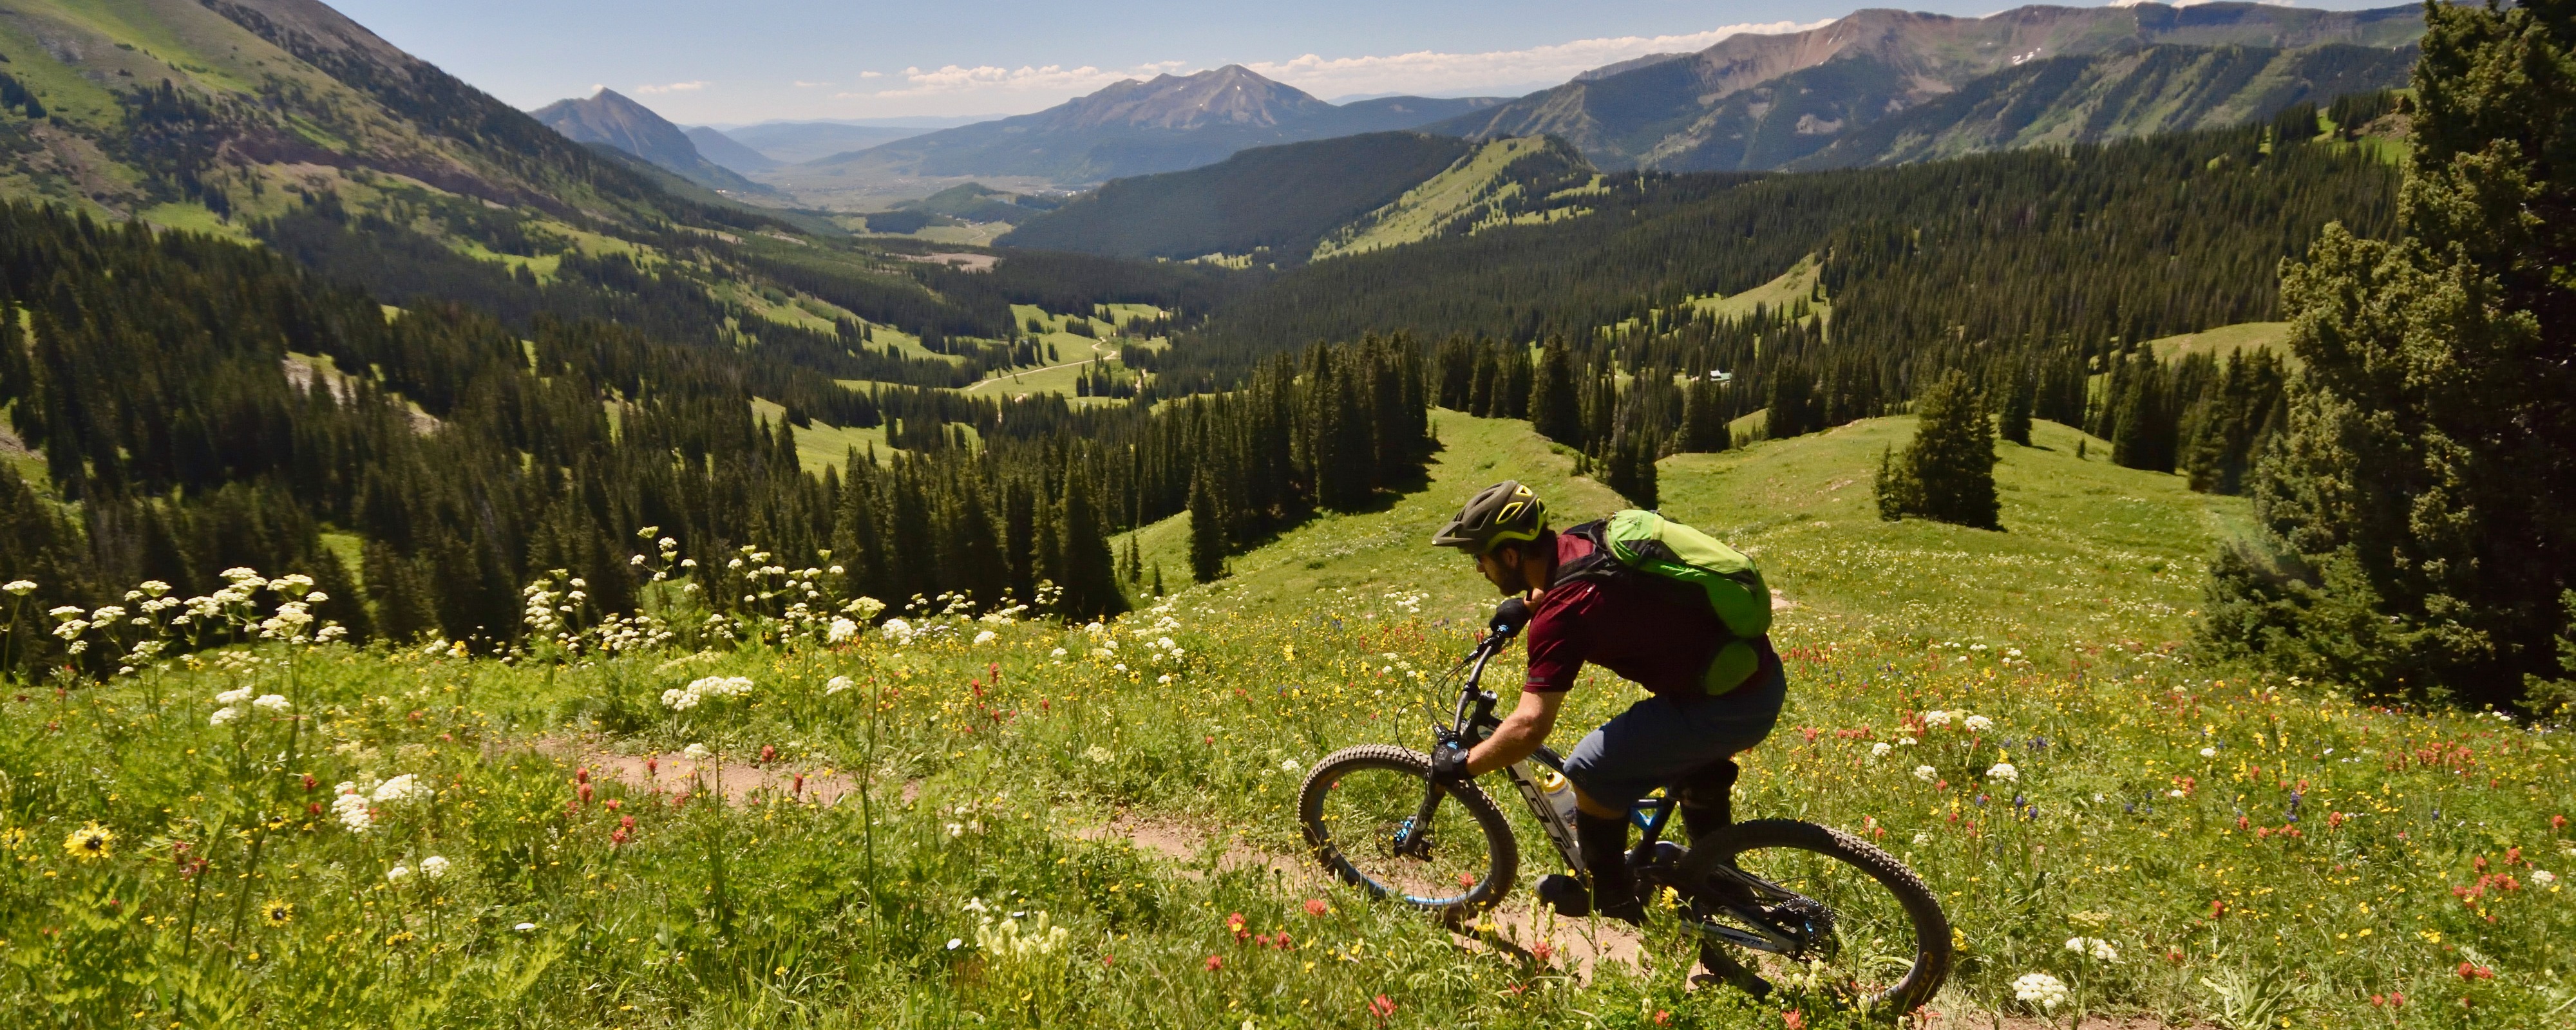 Trail 403, Crested Butte, Colorado. Rider: Greg Heil. Photo: Marcel Slootheer.